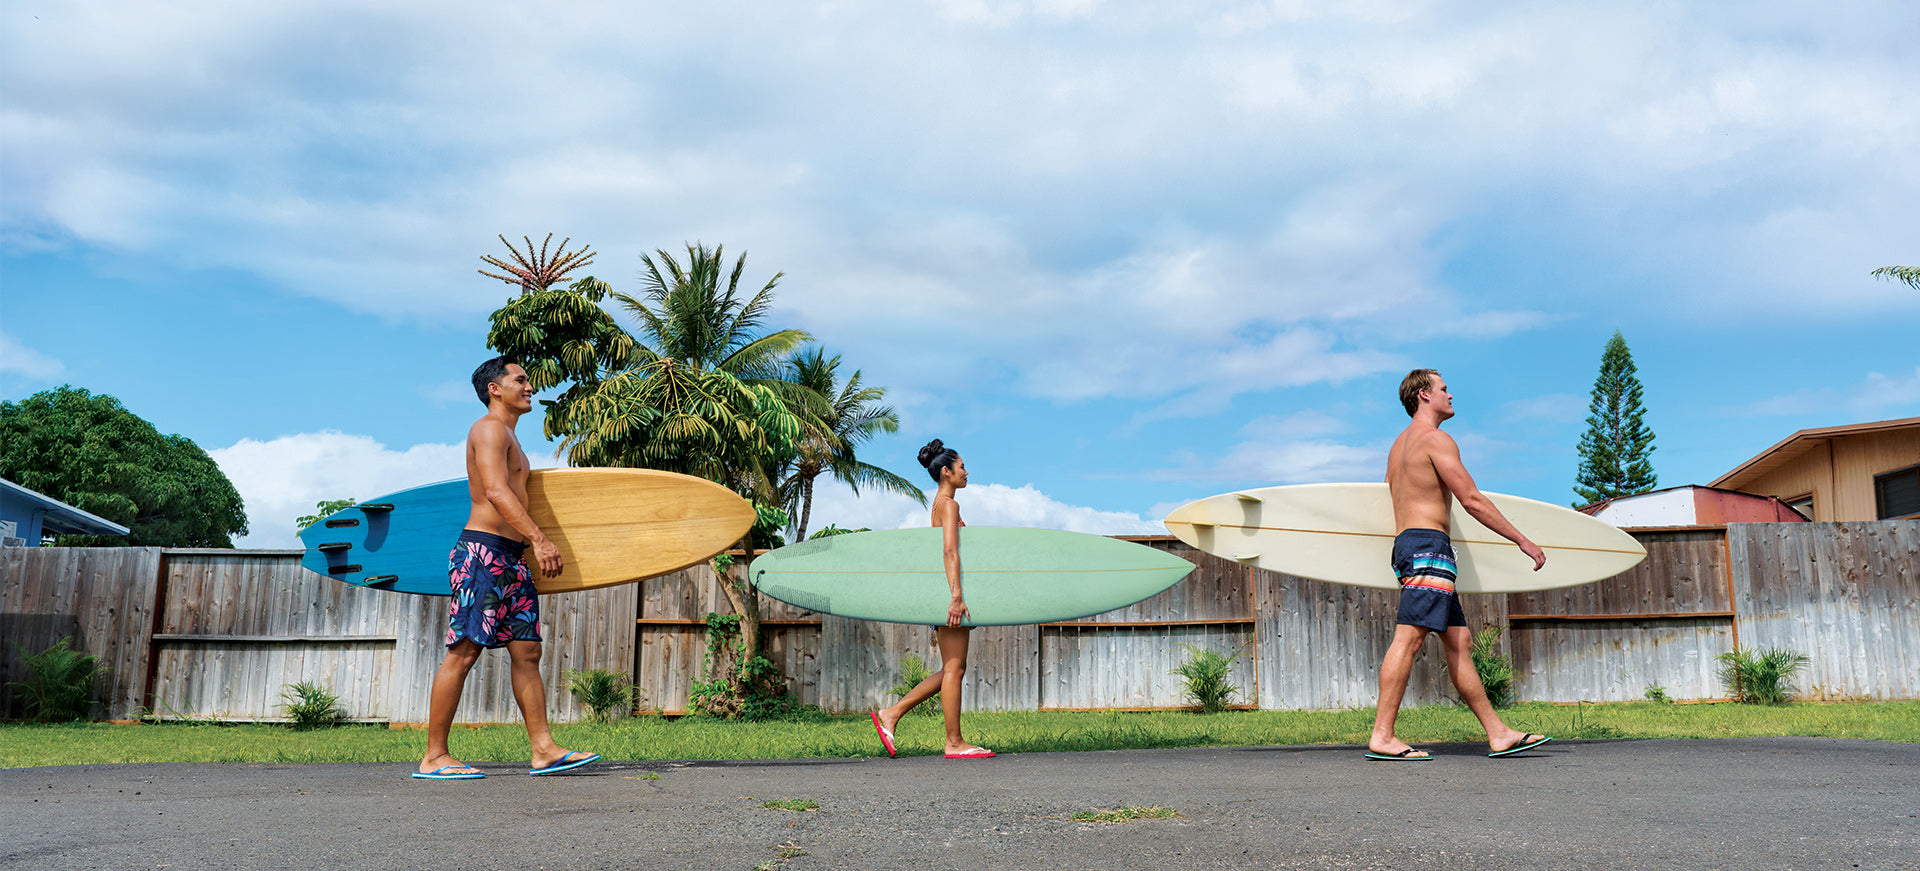 3 surfers carrying boards walking on a street wearing Locals slippahs